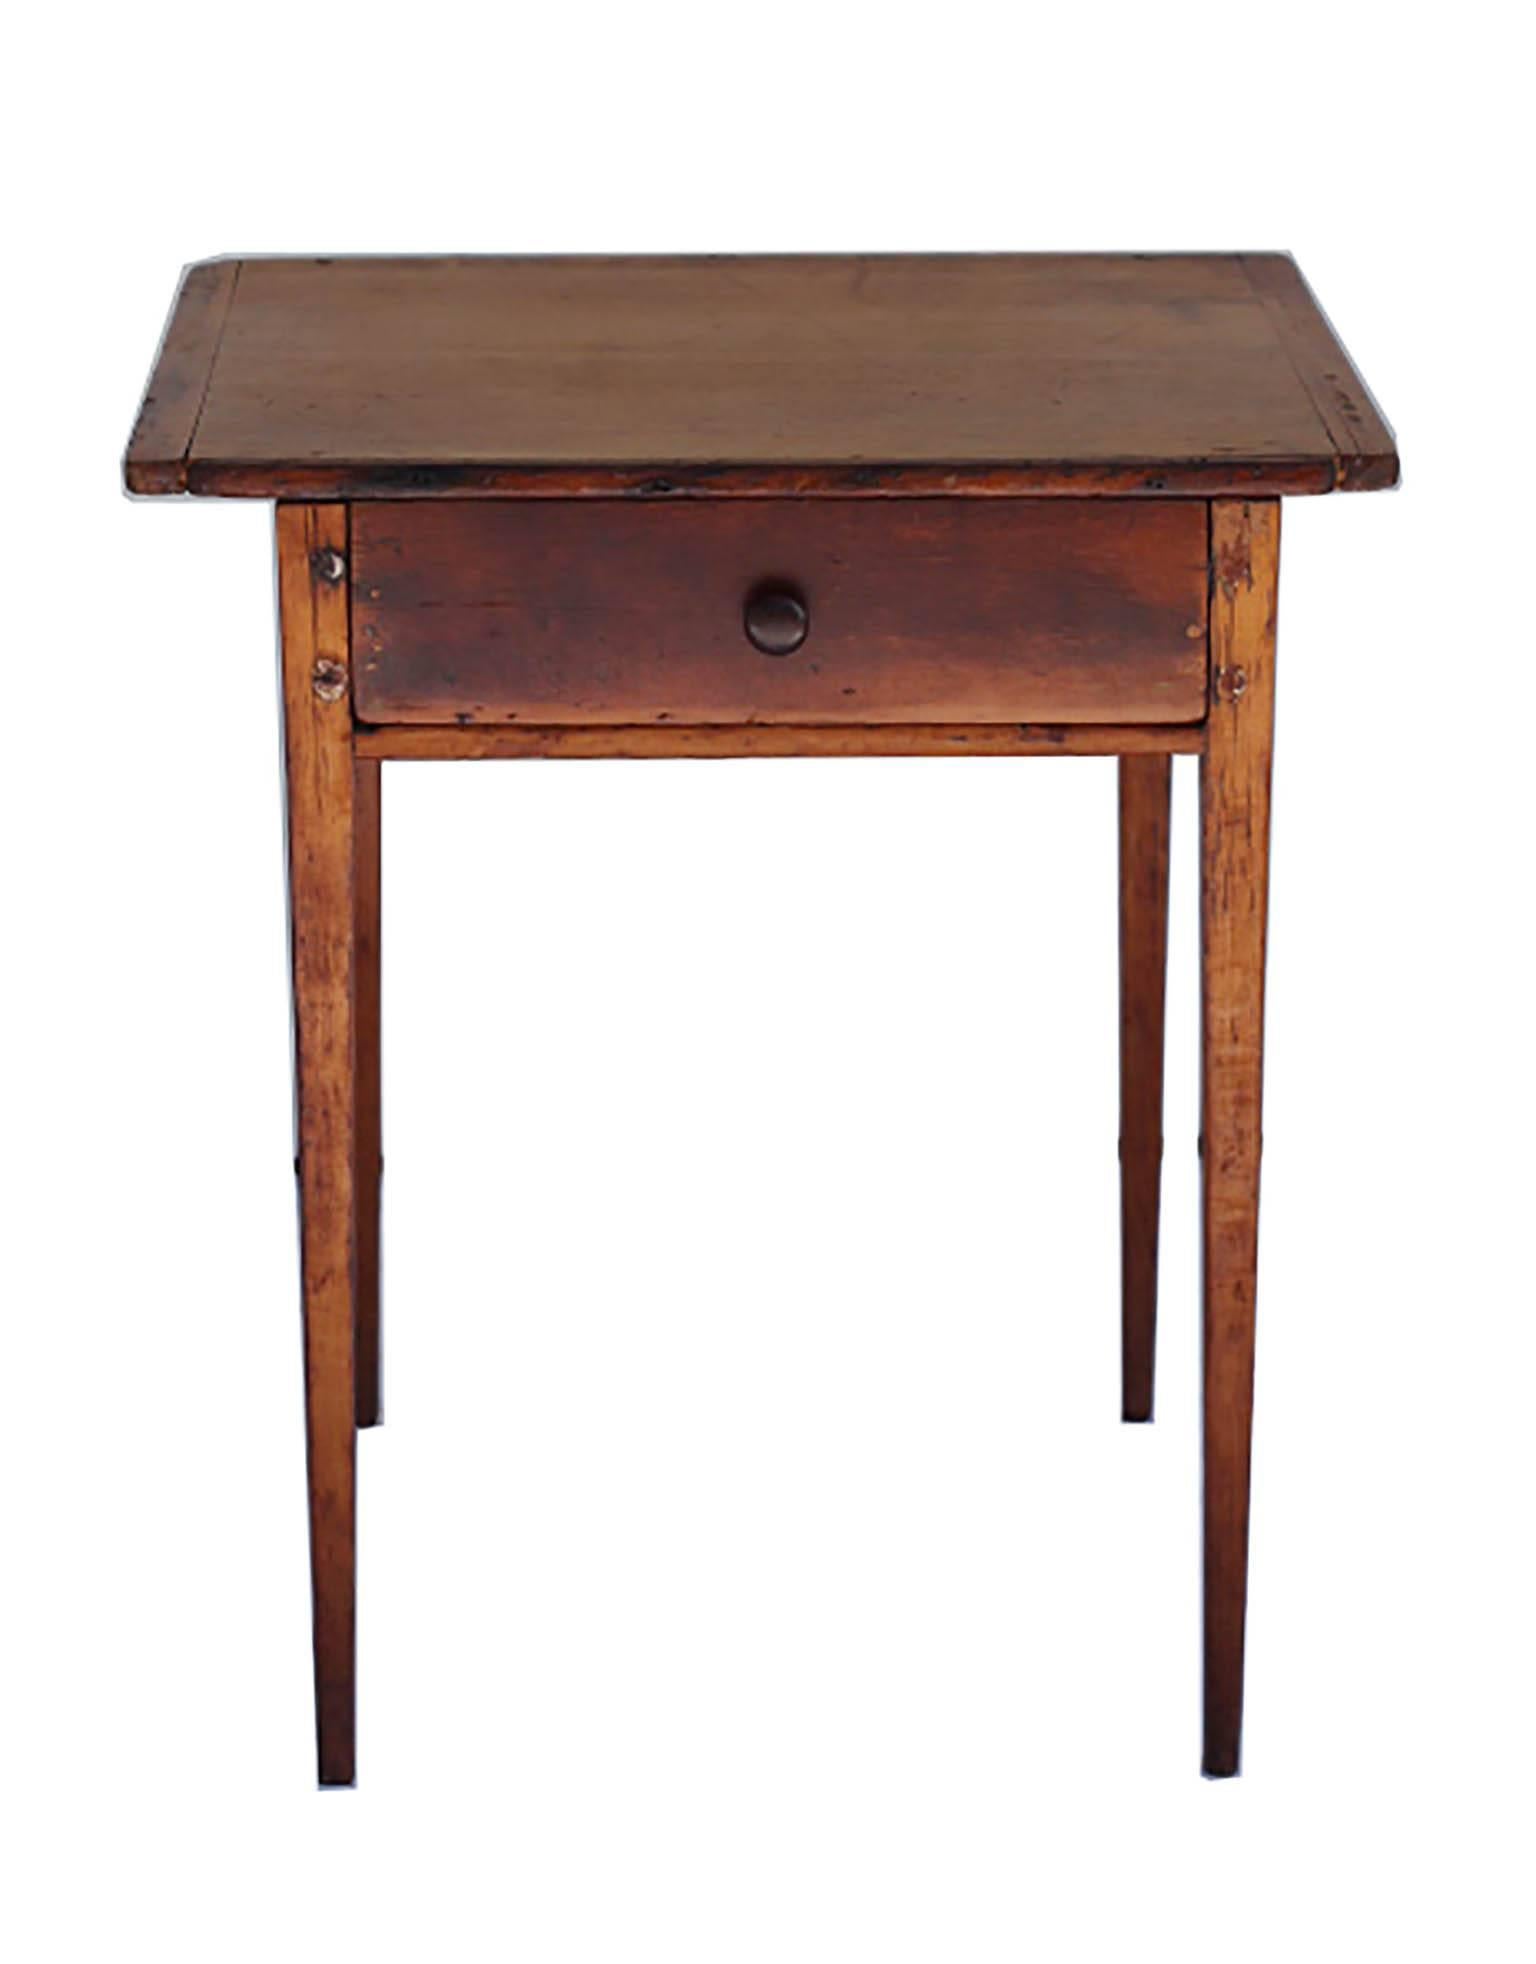 ABOUT

This is an extremely rare example of an 18th century cherry and Southern yellow pine side table c. 1770-1790. A one-drawer side table with a breadboard top and tapered legs. Likely made in the historic Harpers Ferry region of the south. This